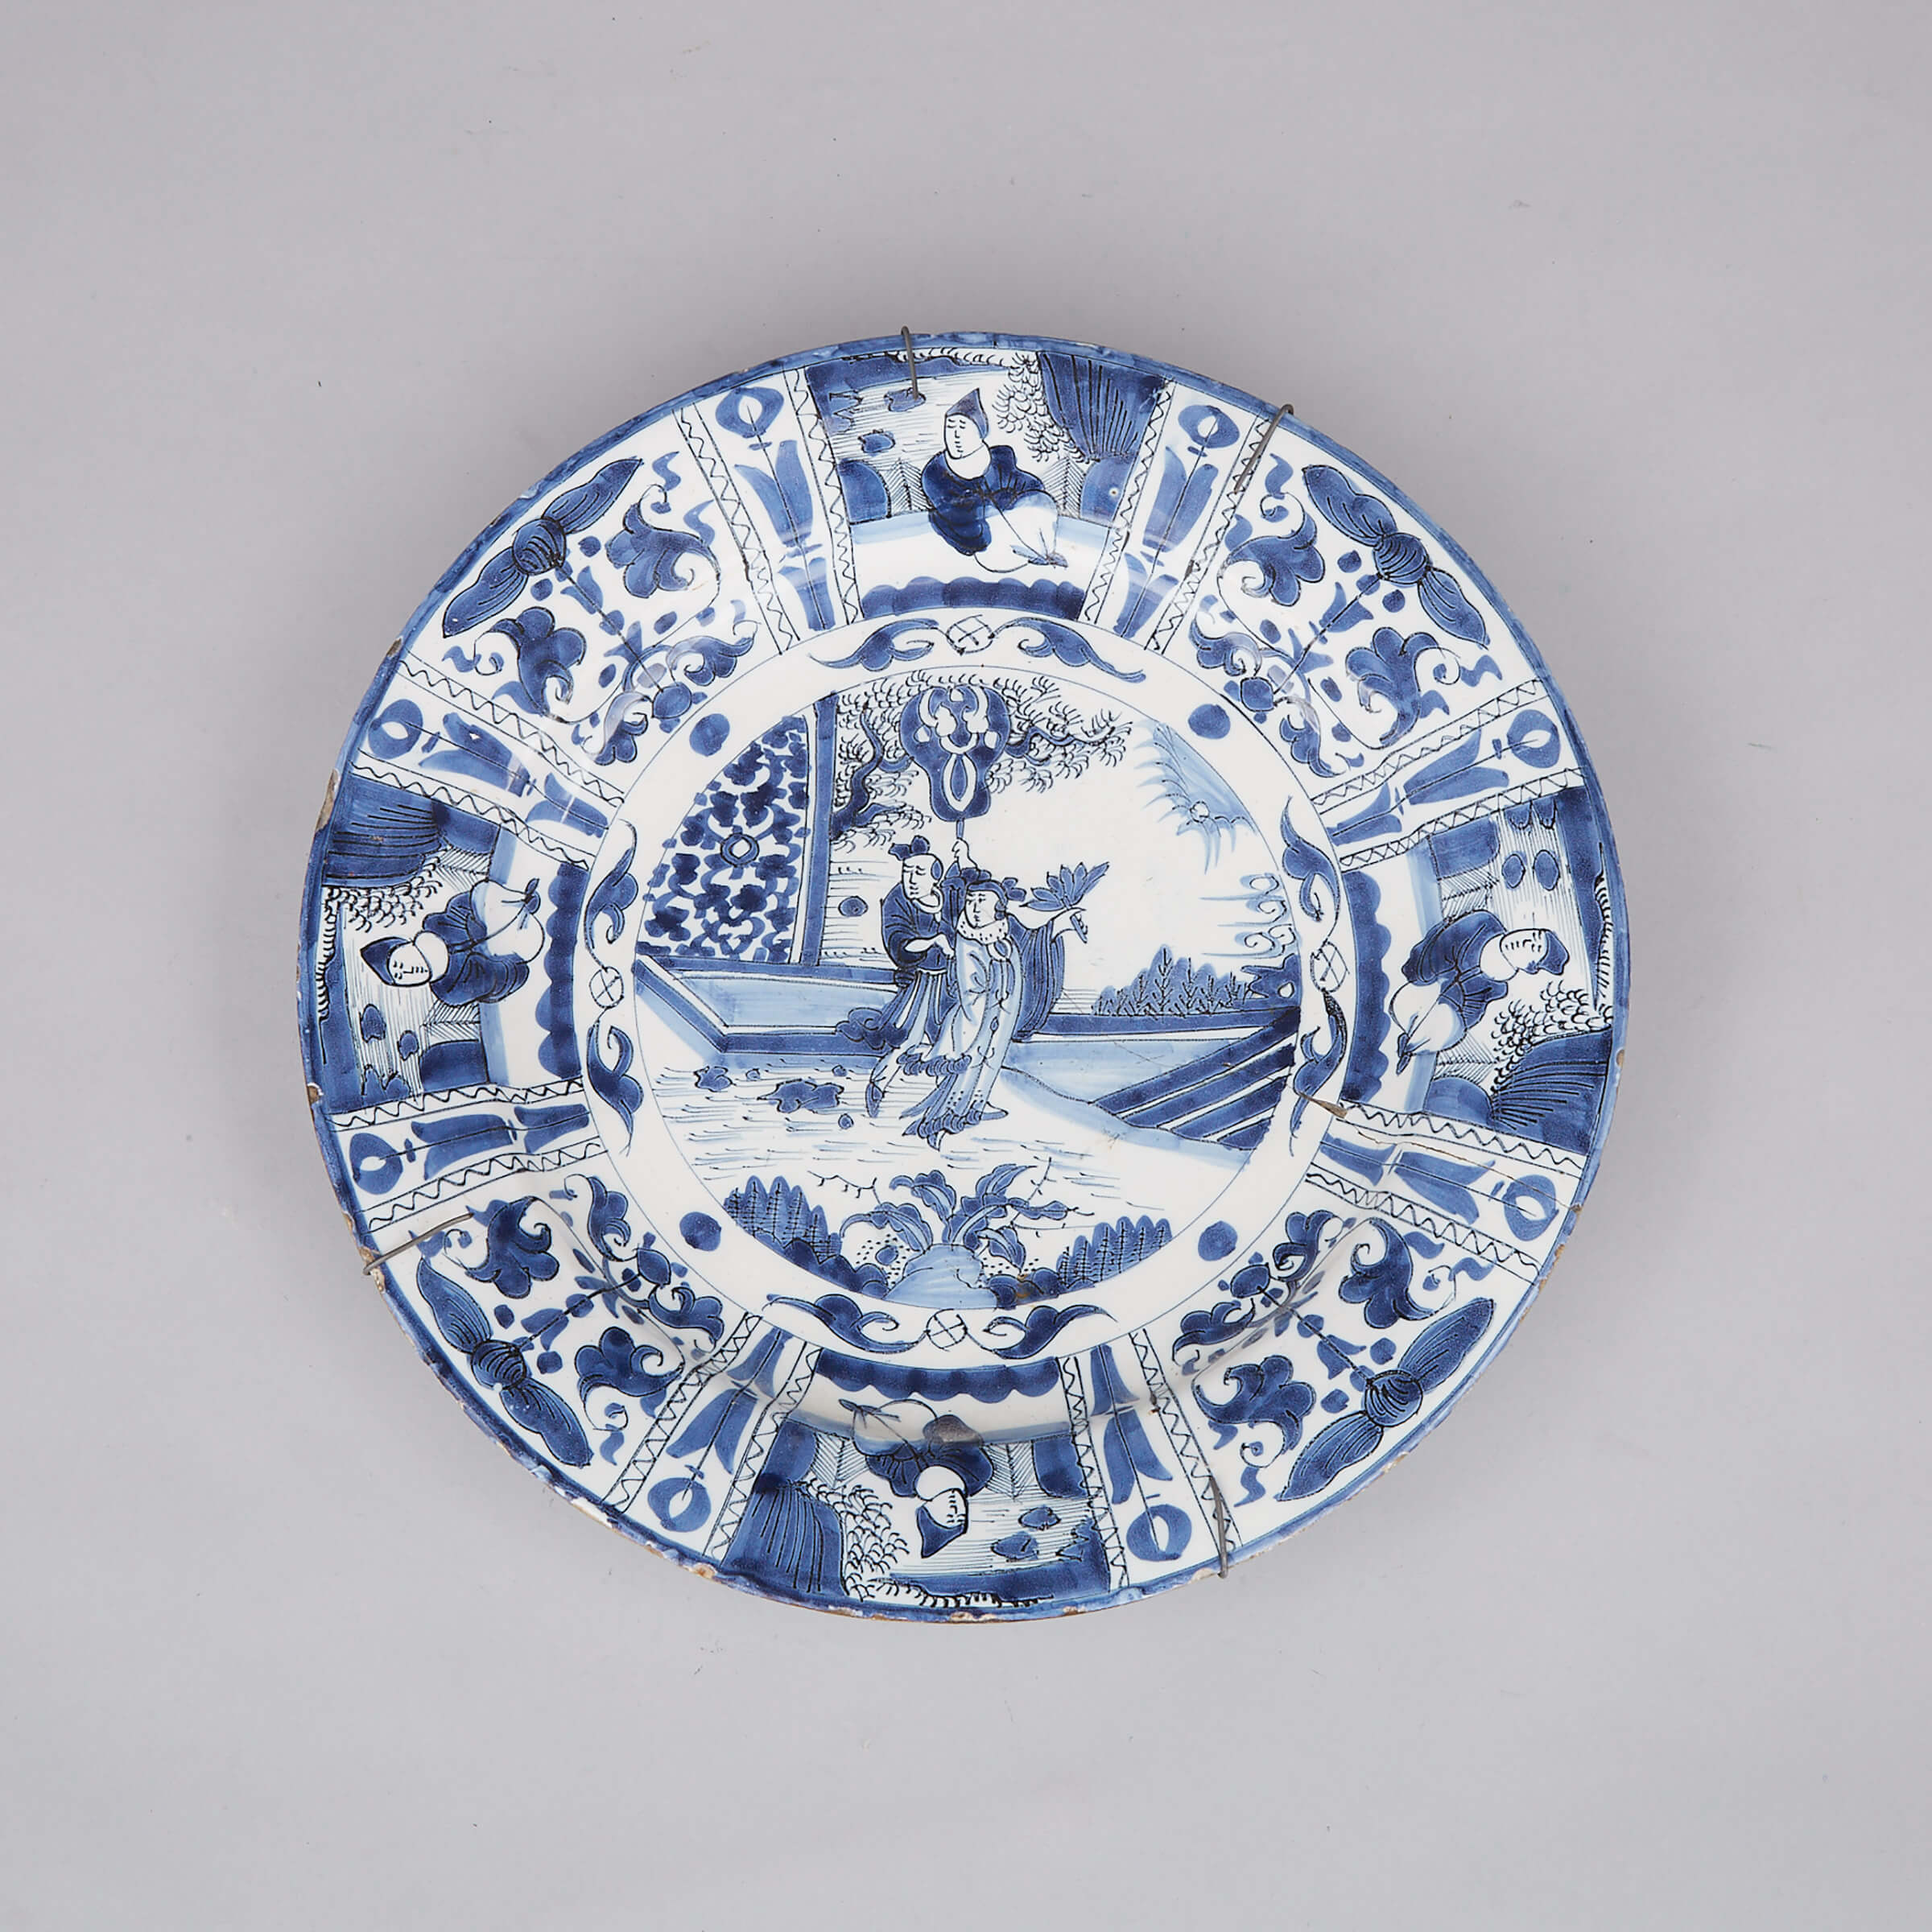 Dutch Delft Blue Painted Charger, 18th century